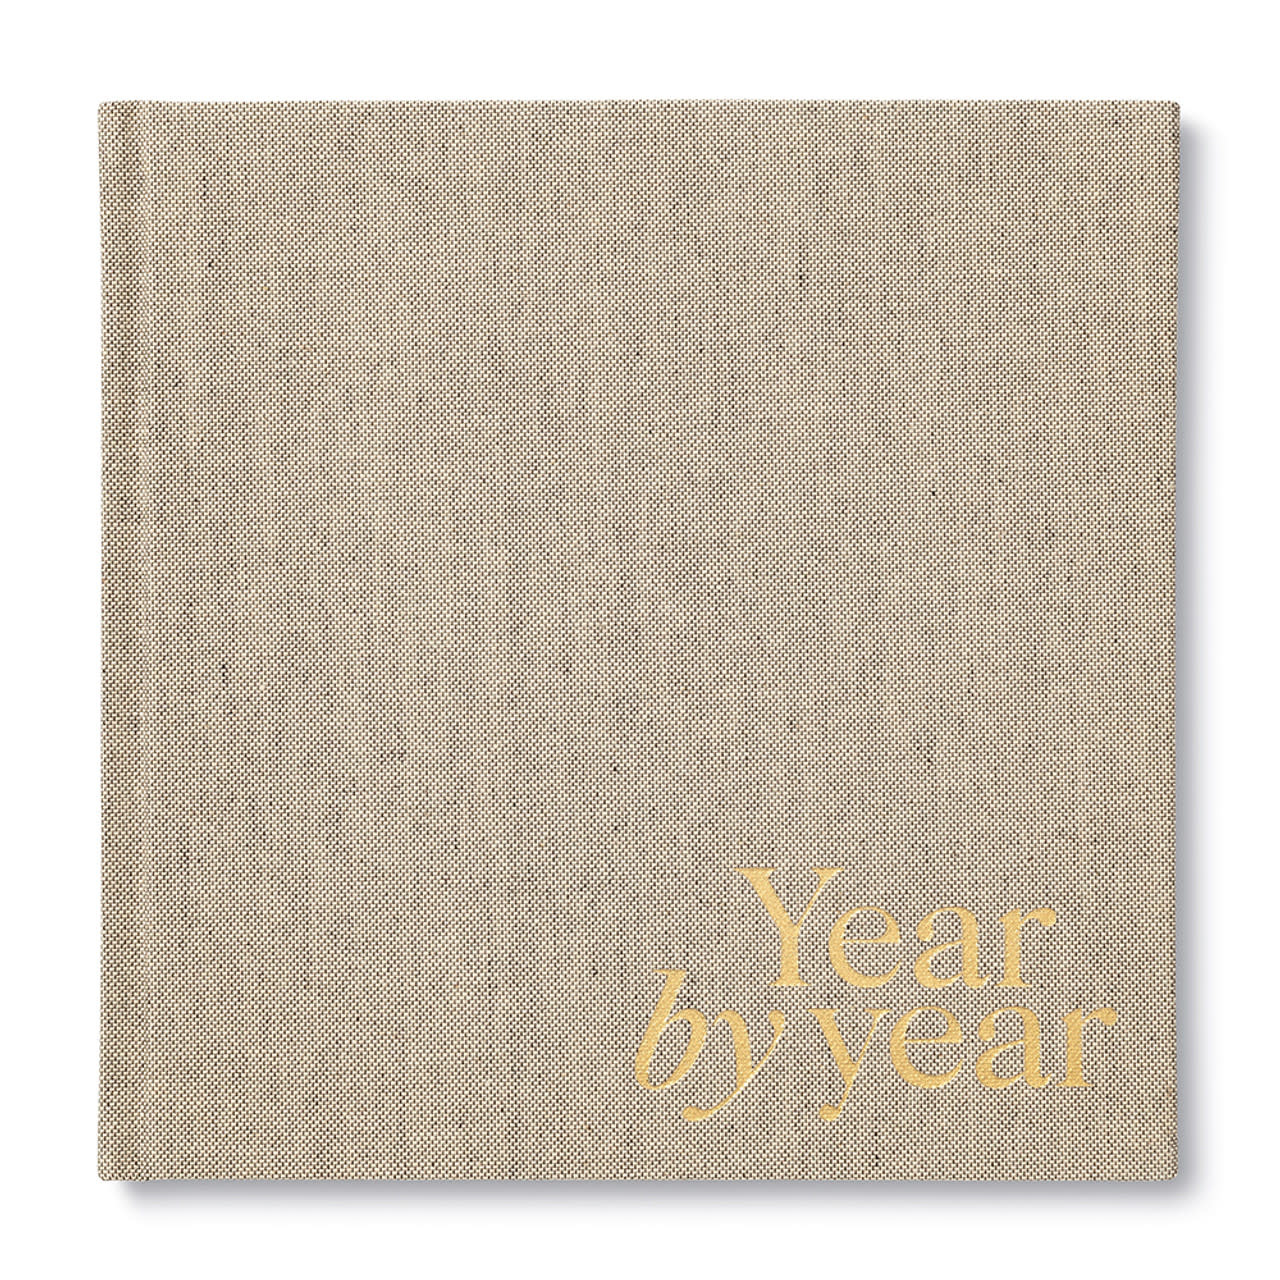 Year by Year Book